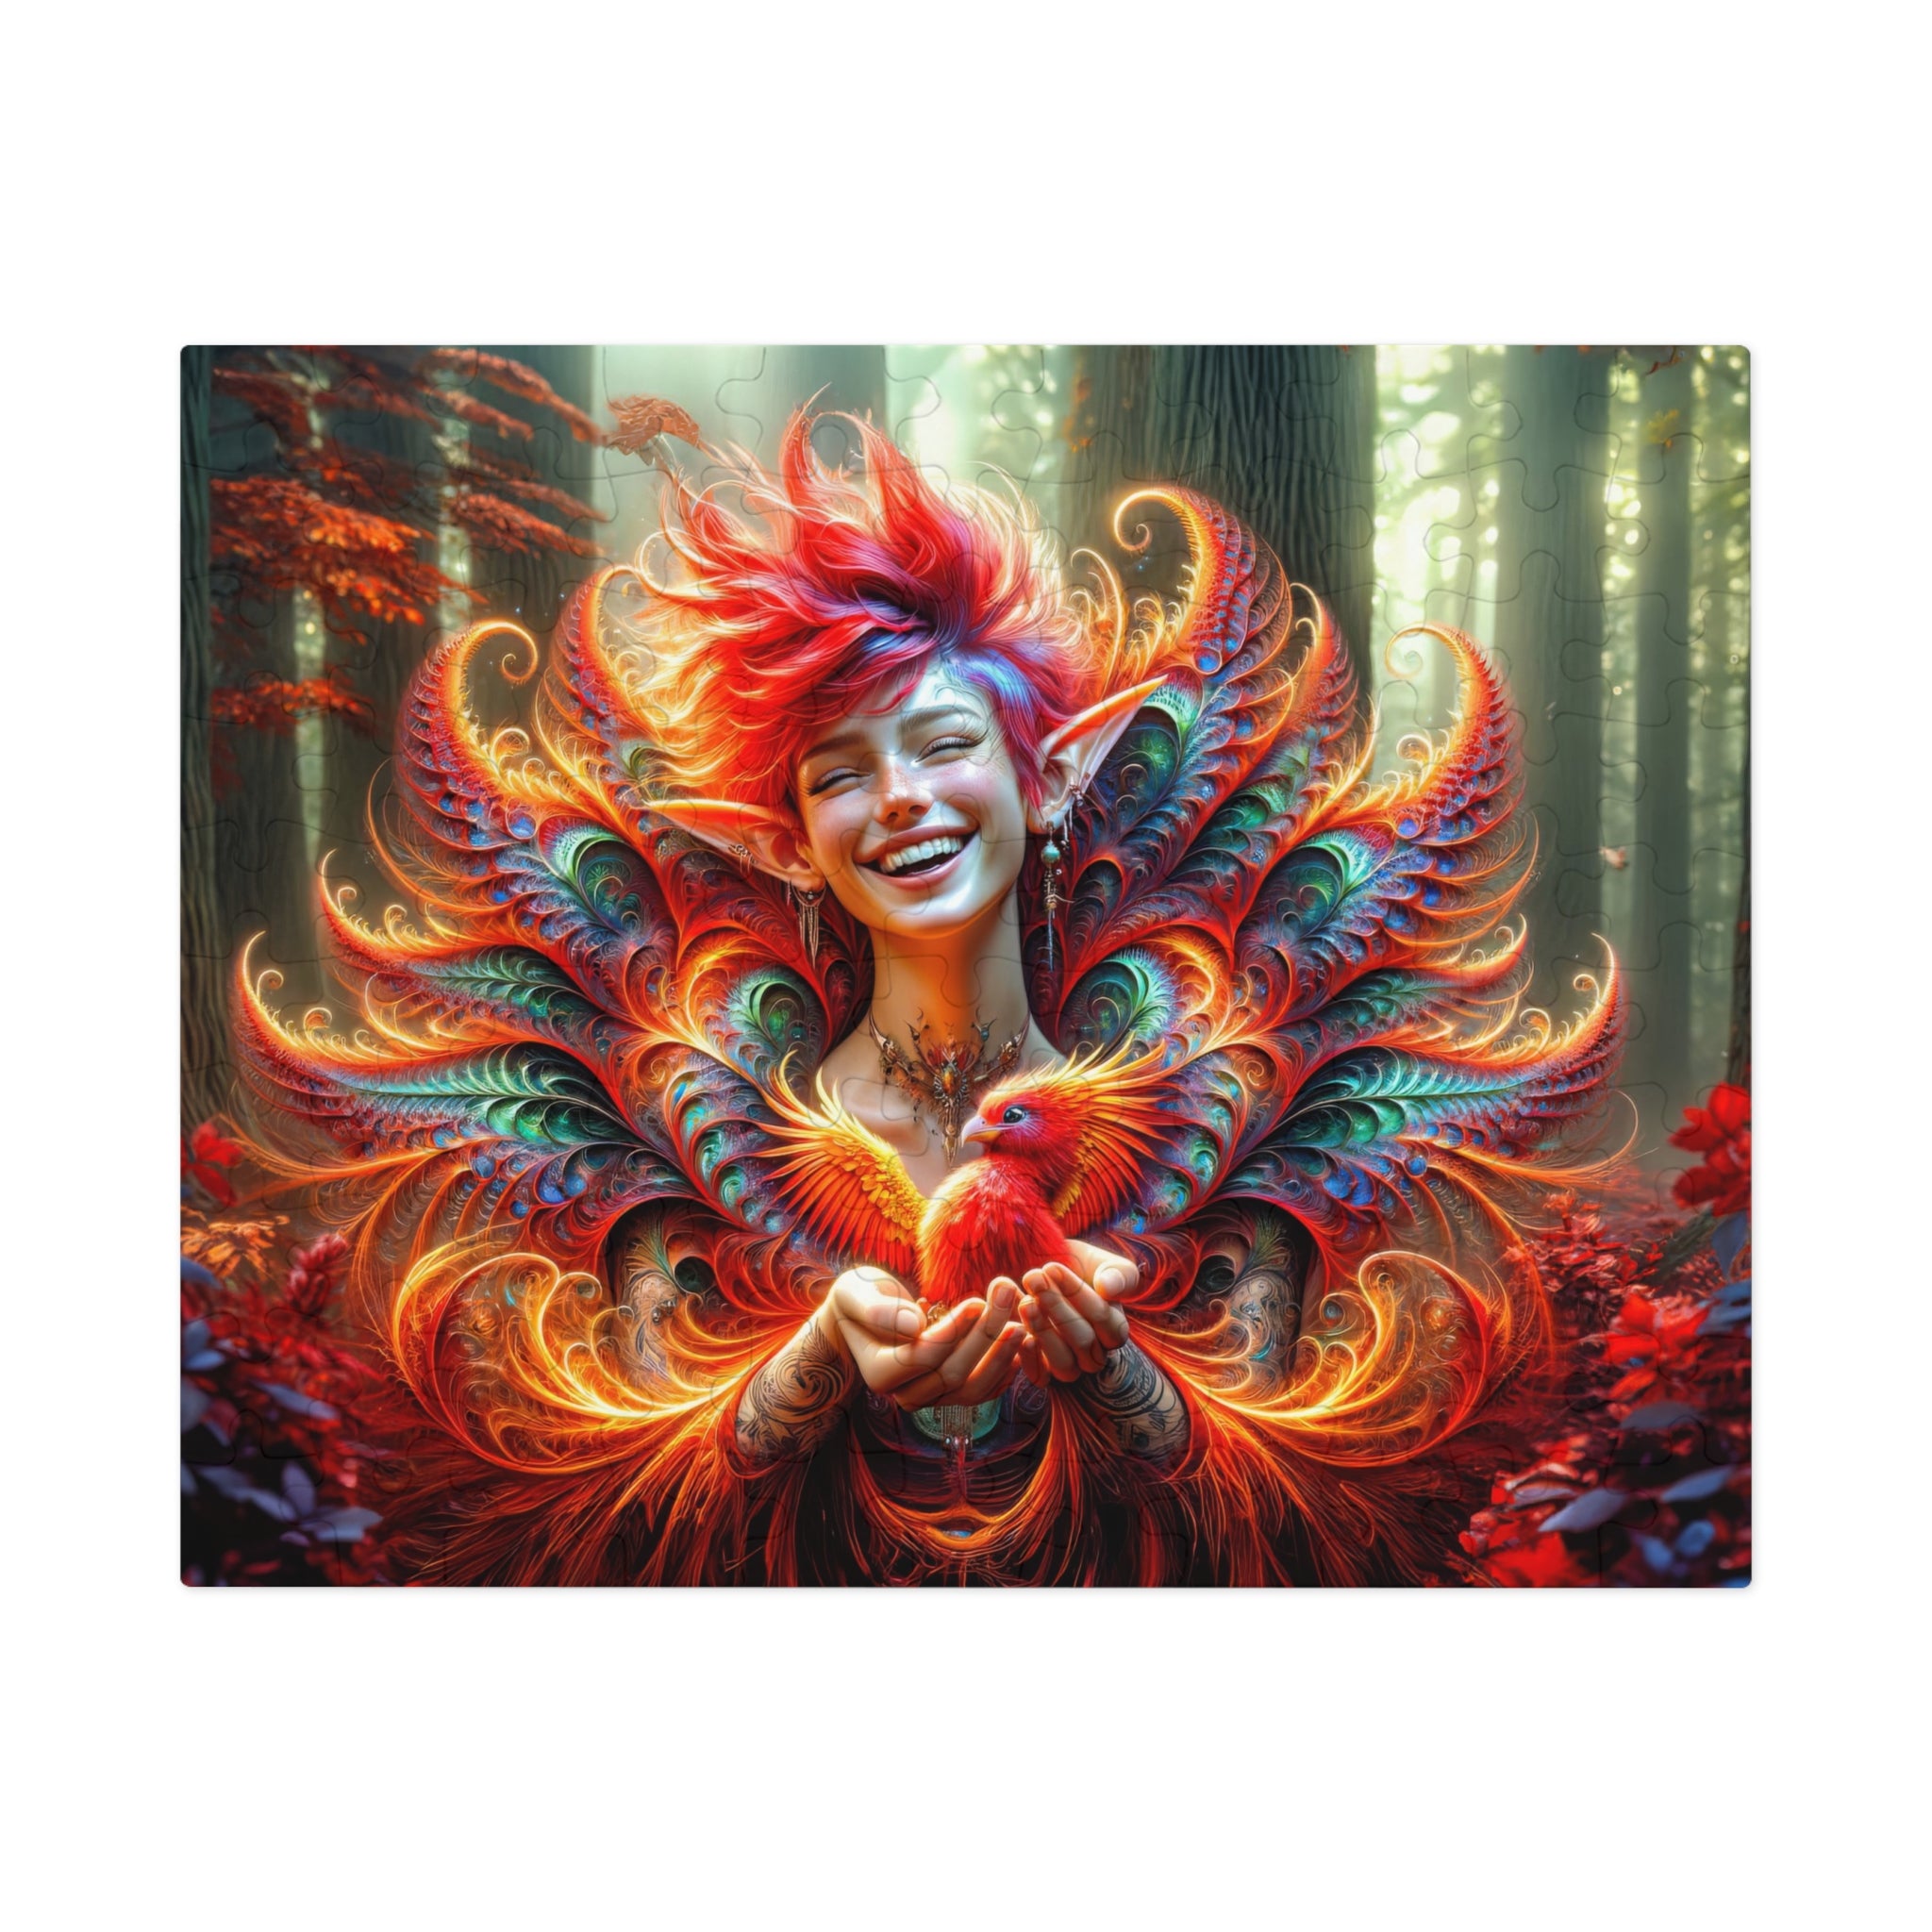 Flames of Jubilation Puzzle